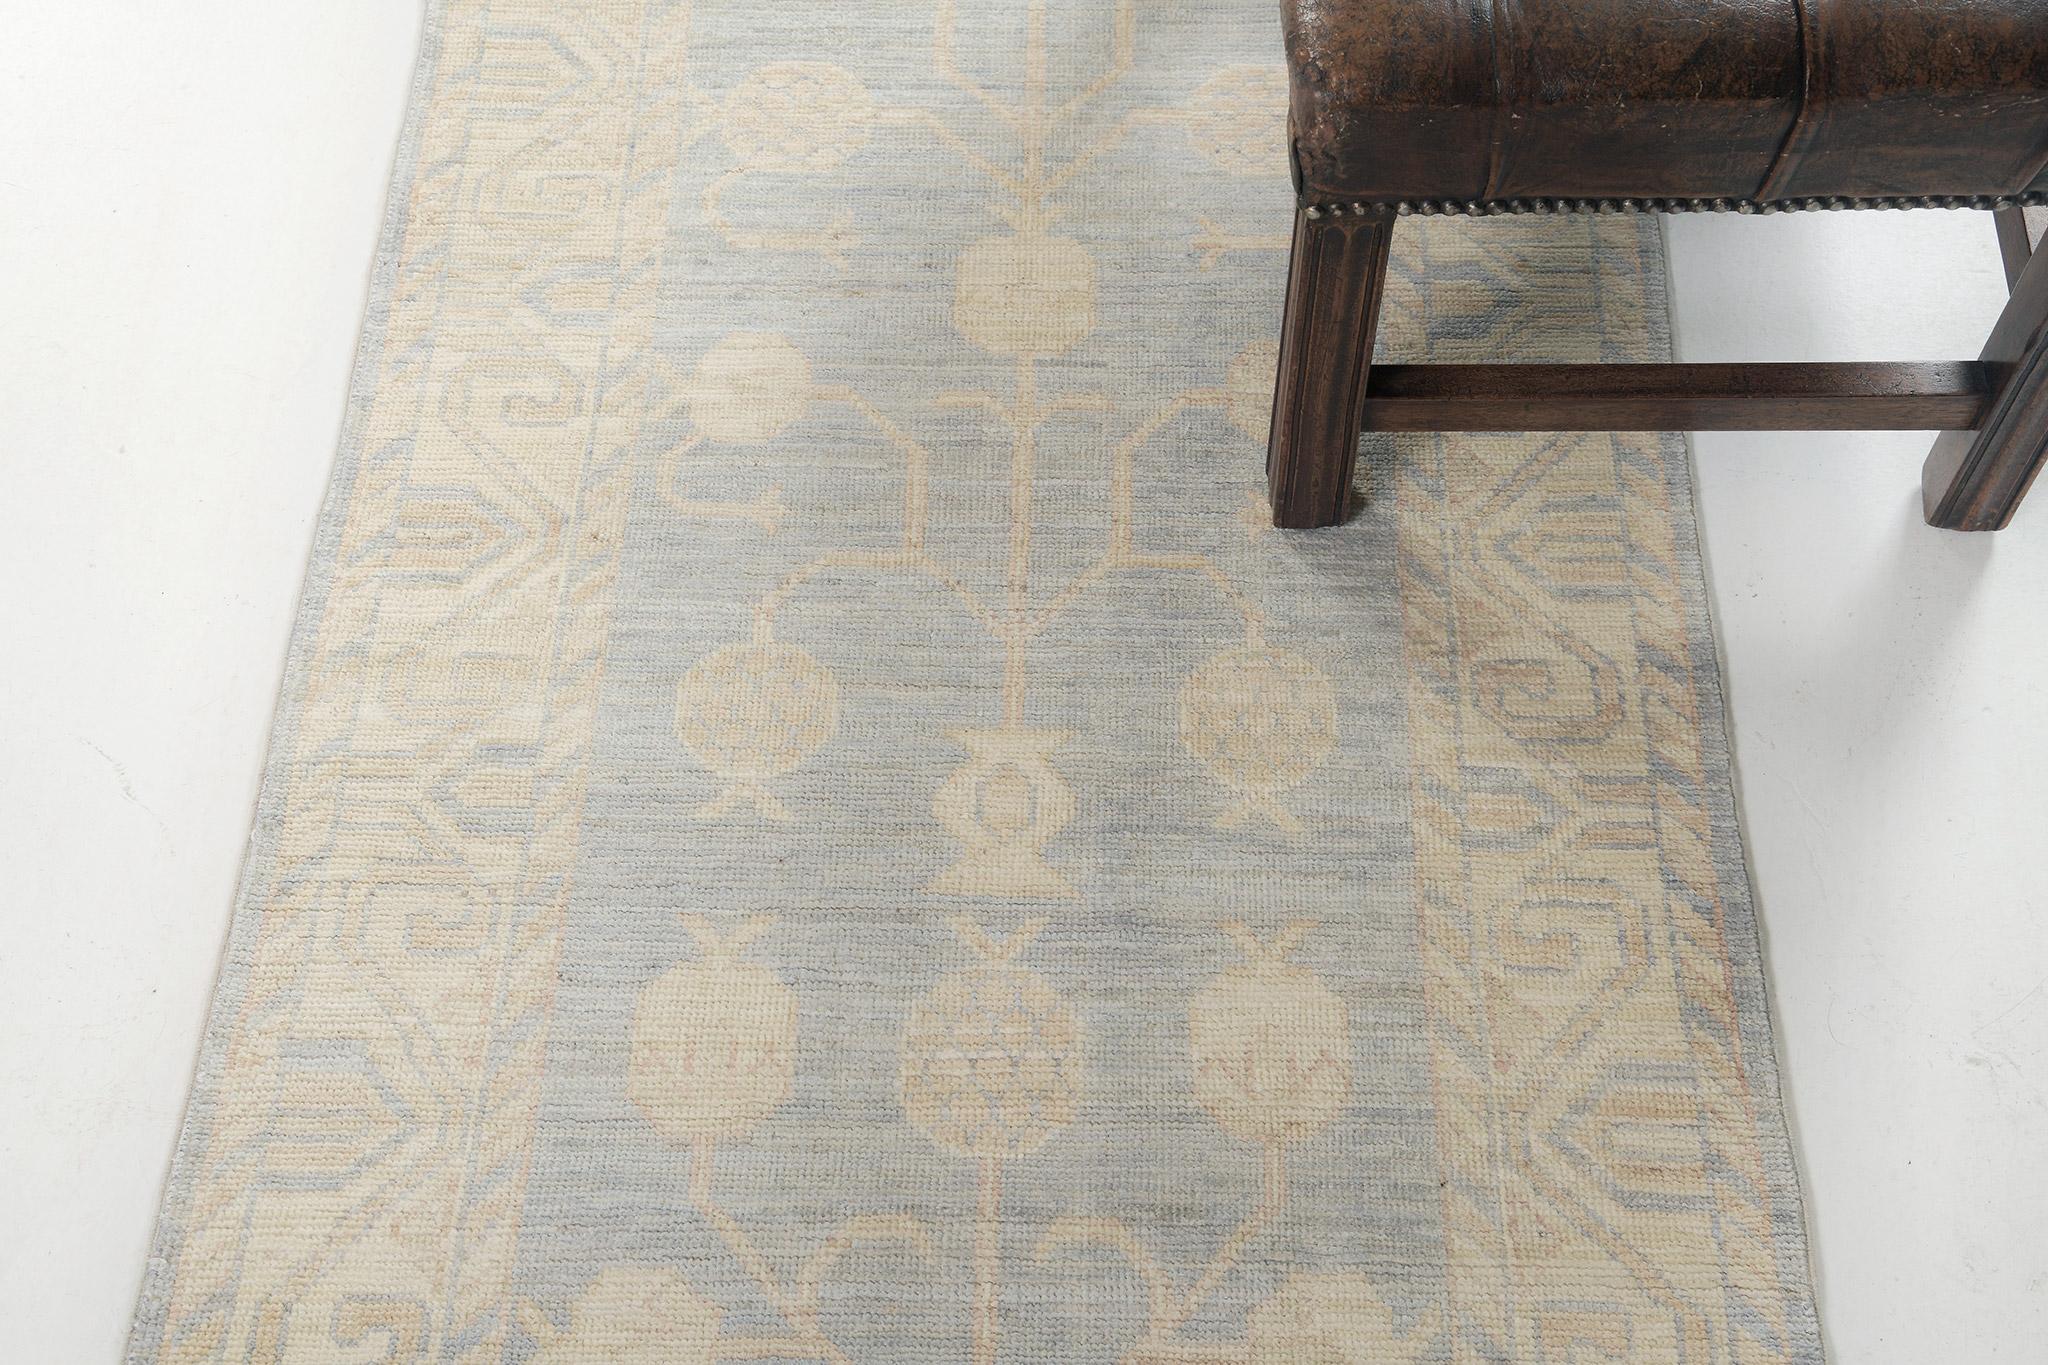 This impressive Khotan Design Rug is ideally suited for a floor piece. A majestic pomegranate motif is faultlessly filled with scattered stylized elements. From geometric patterned borders to the muted cool toned field, it complements every single